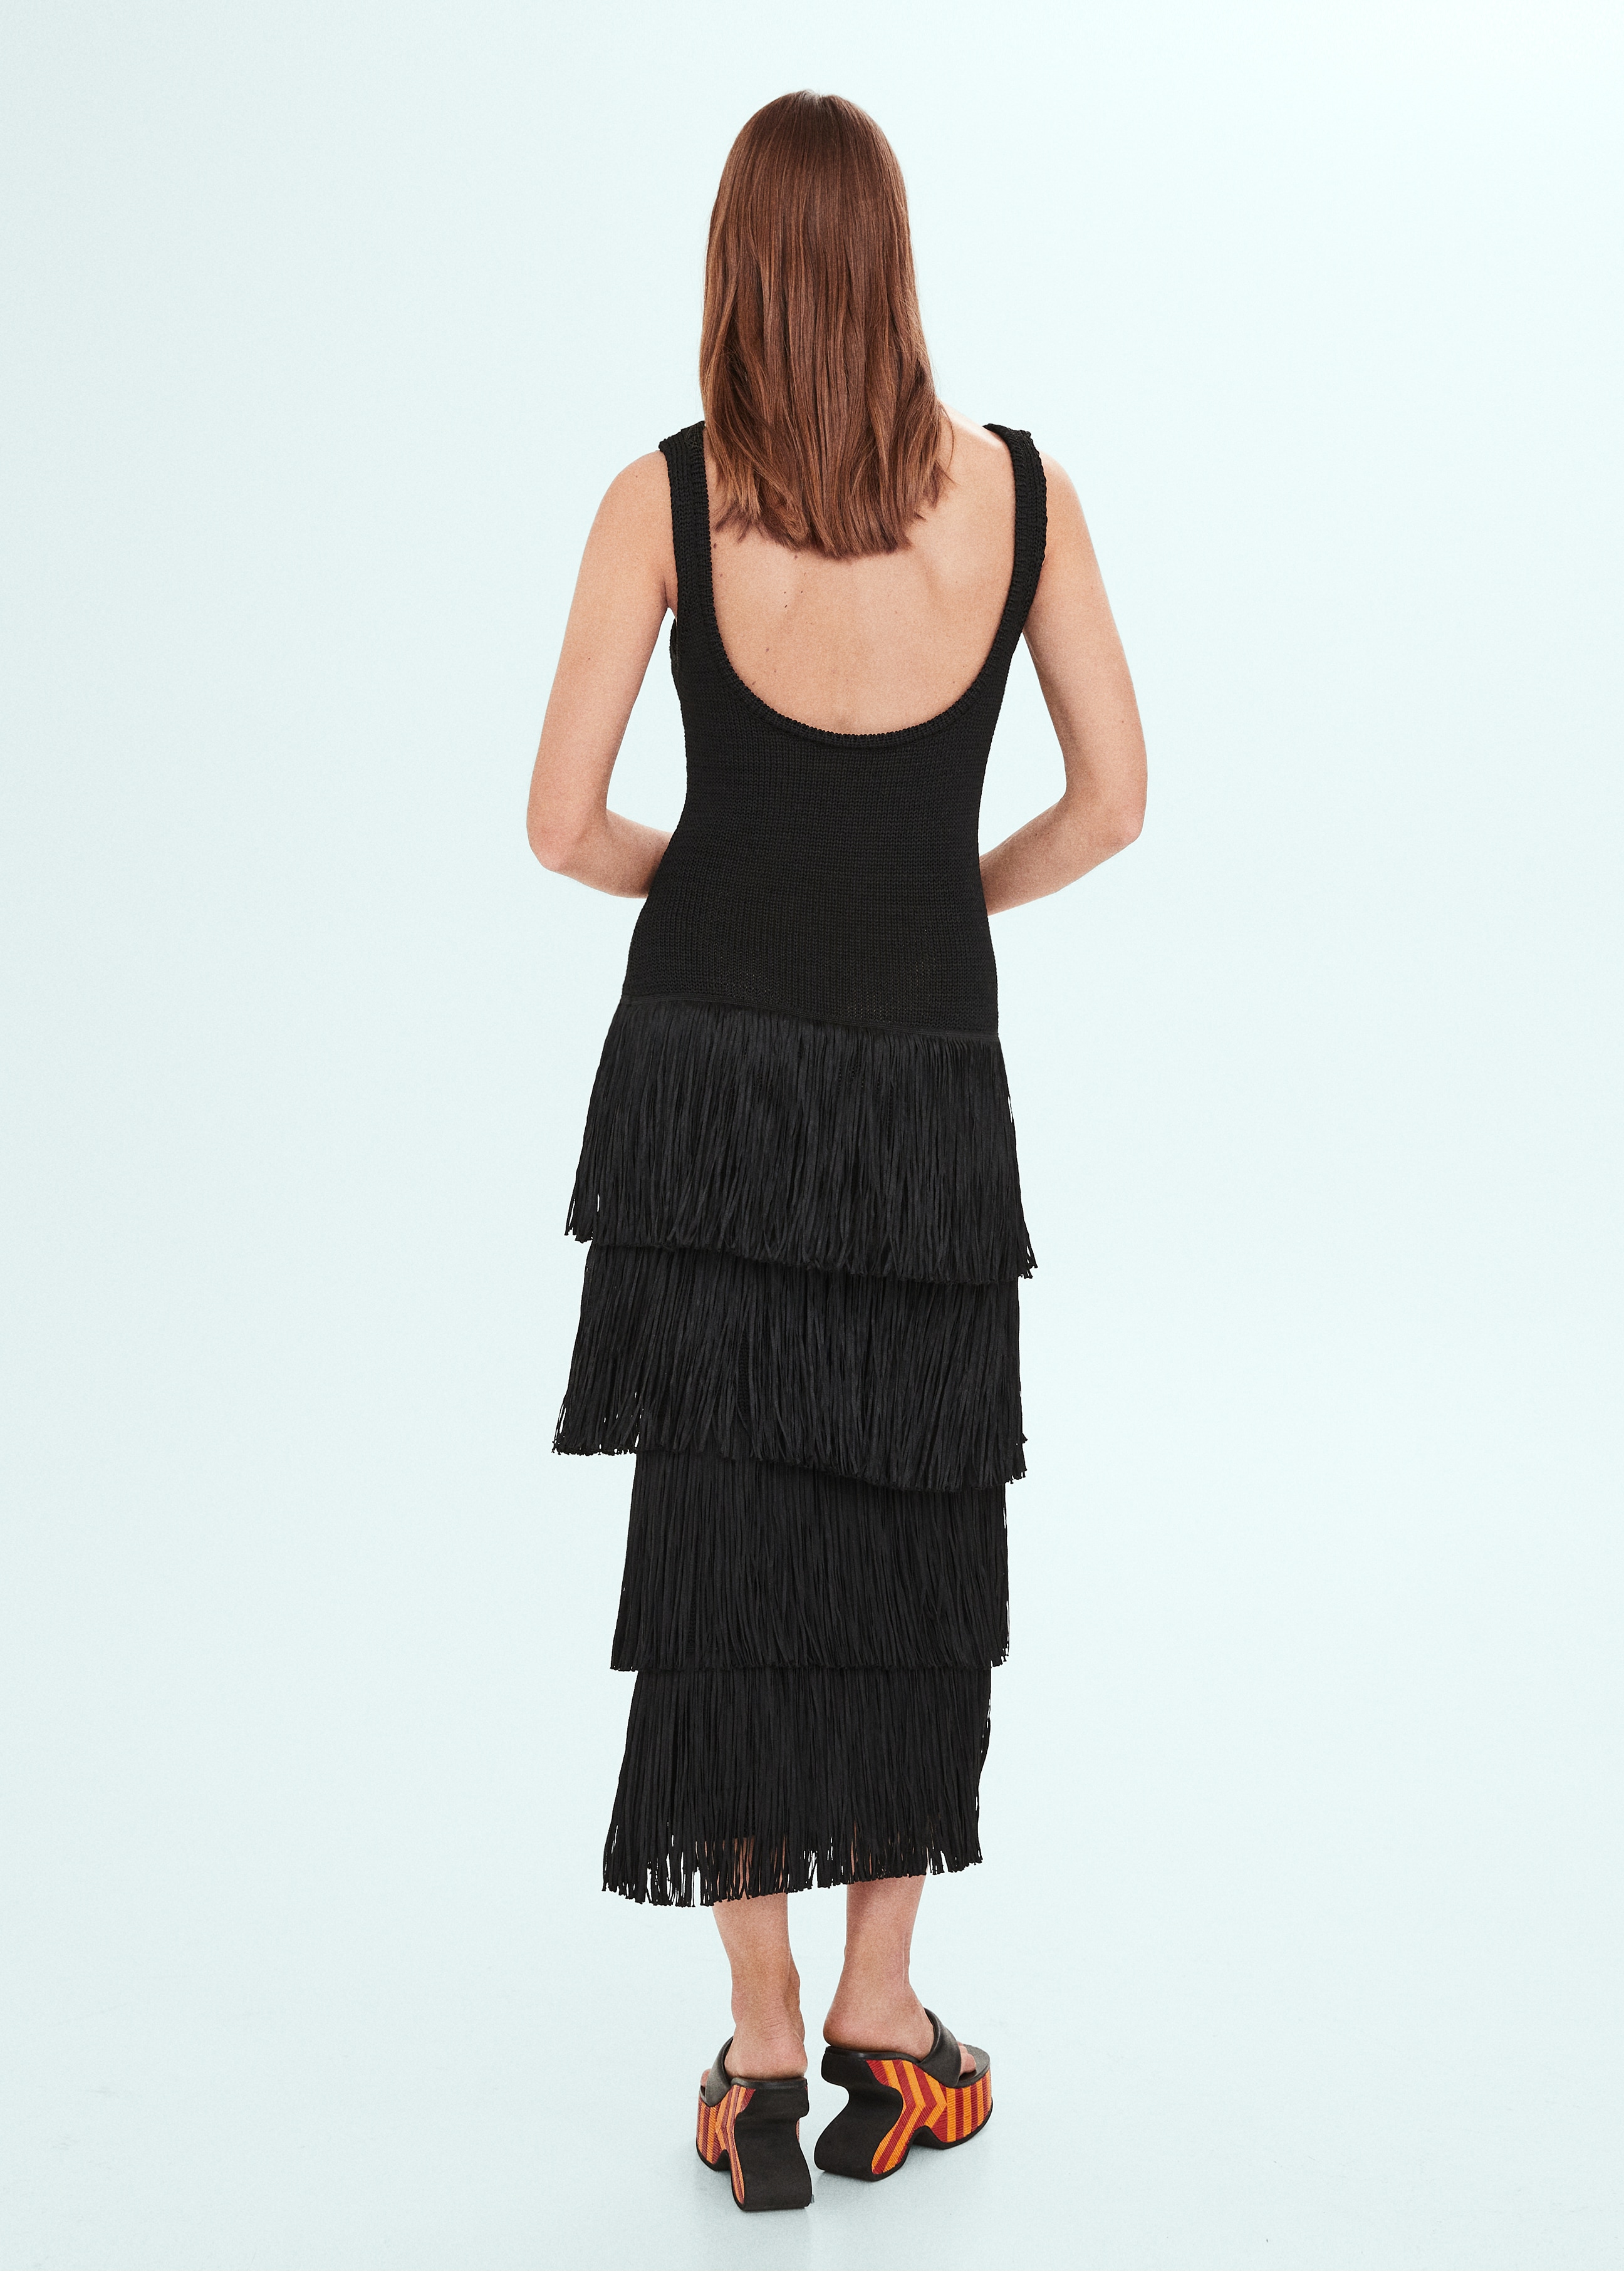 Knitted dress with fringe design